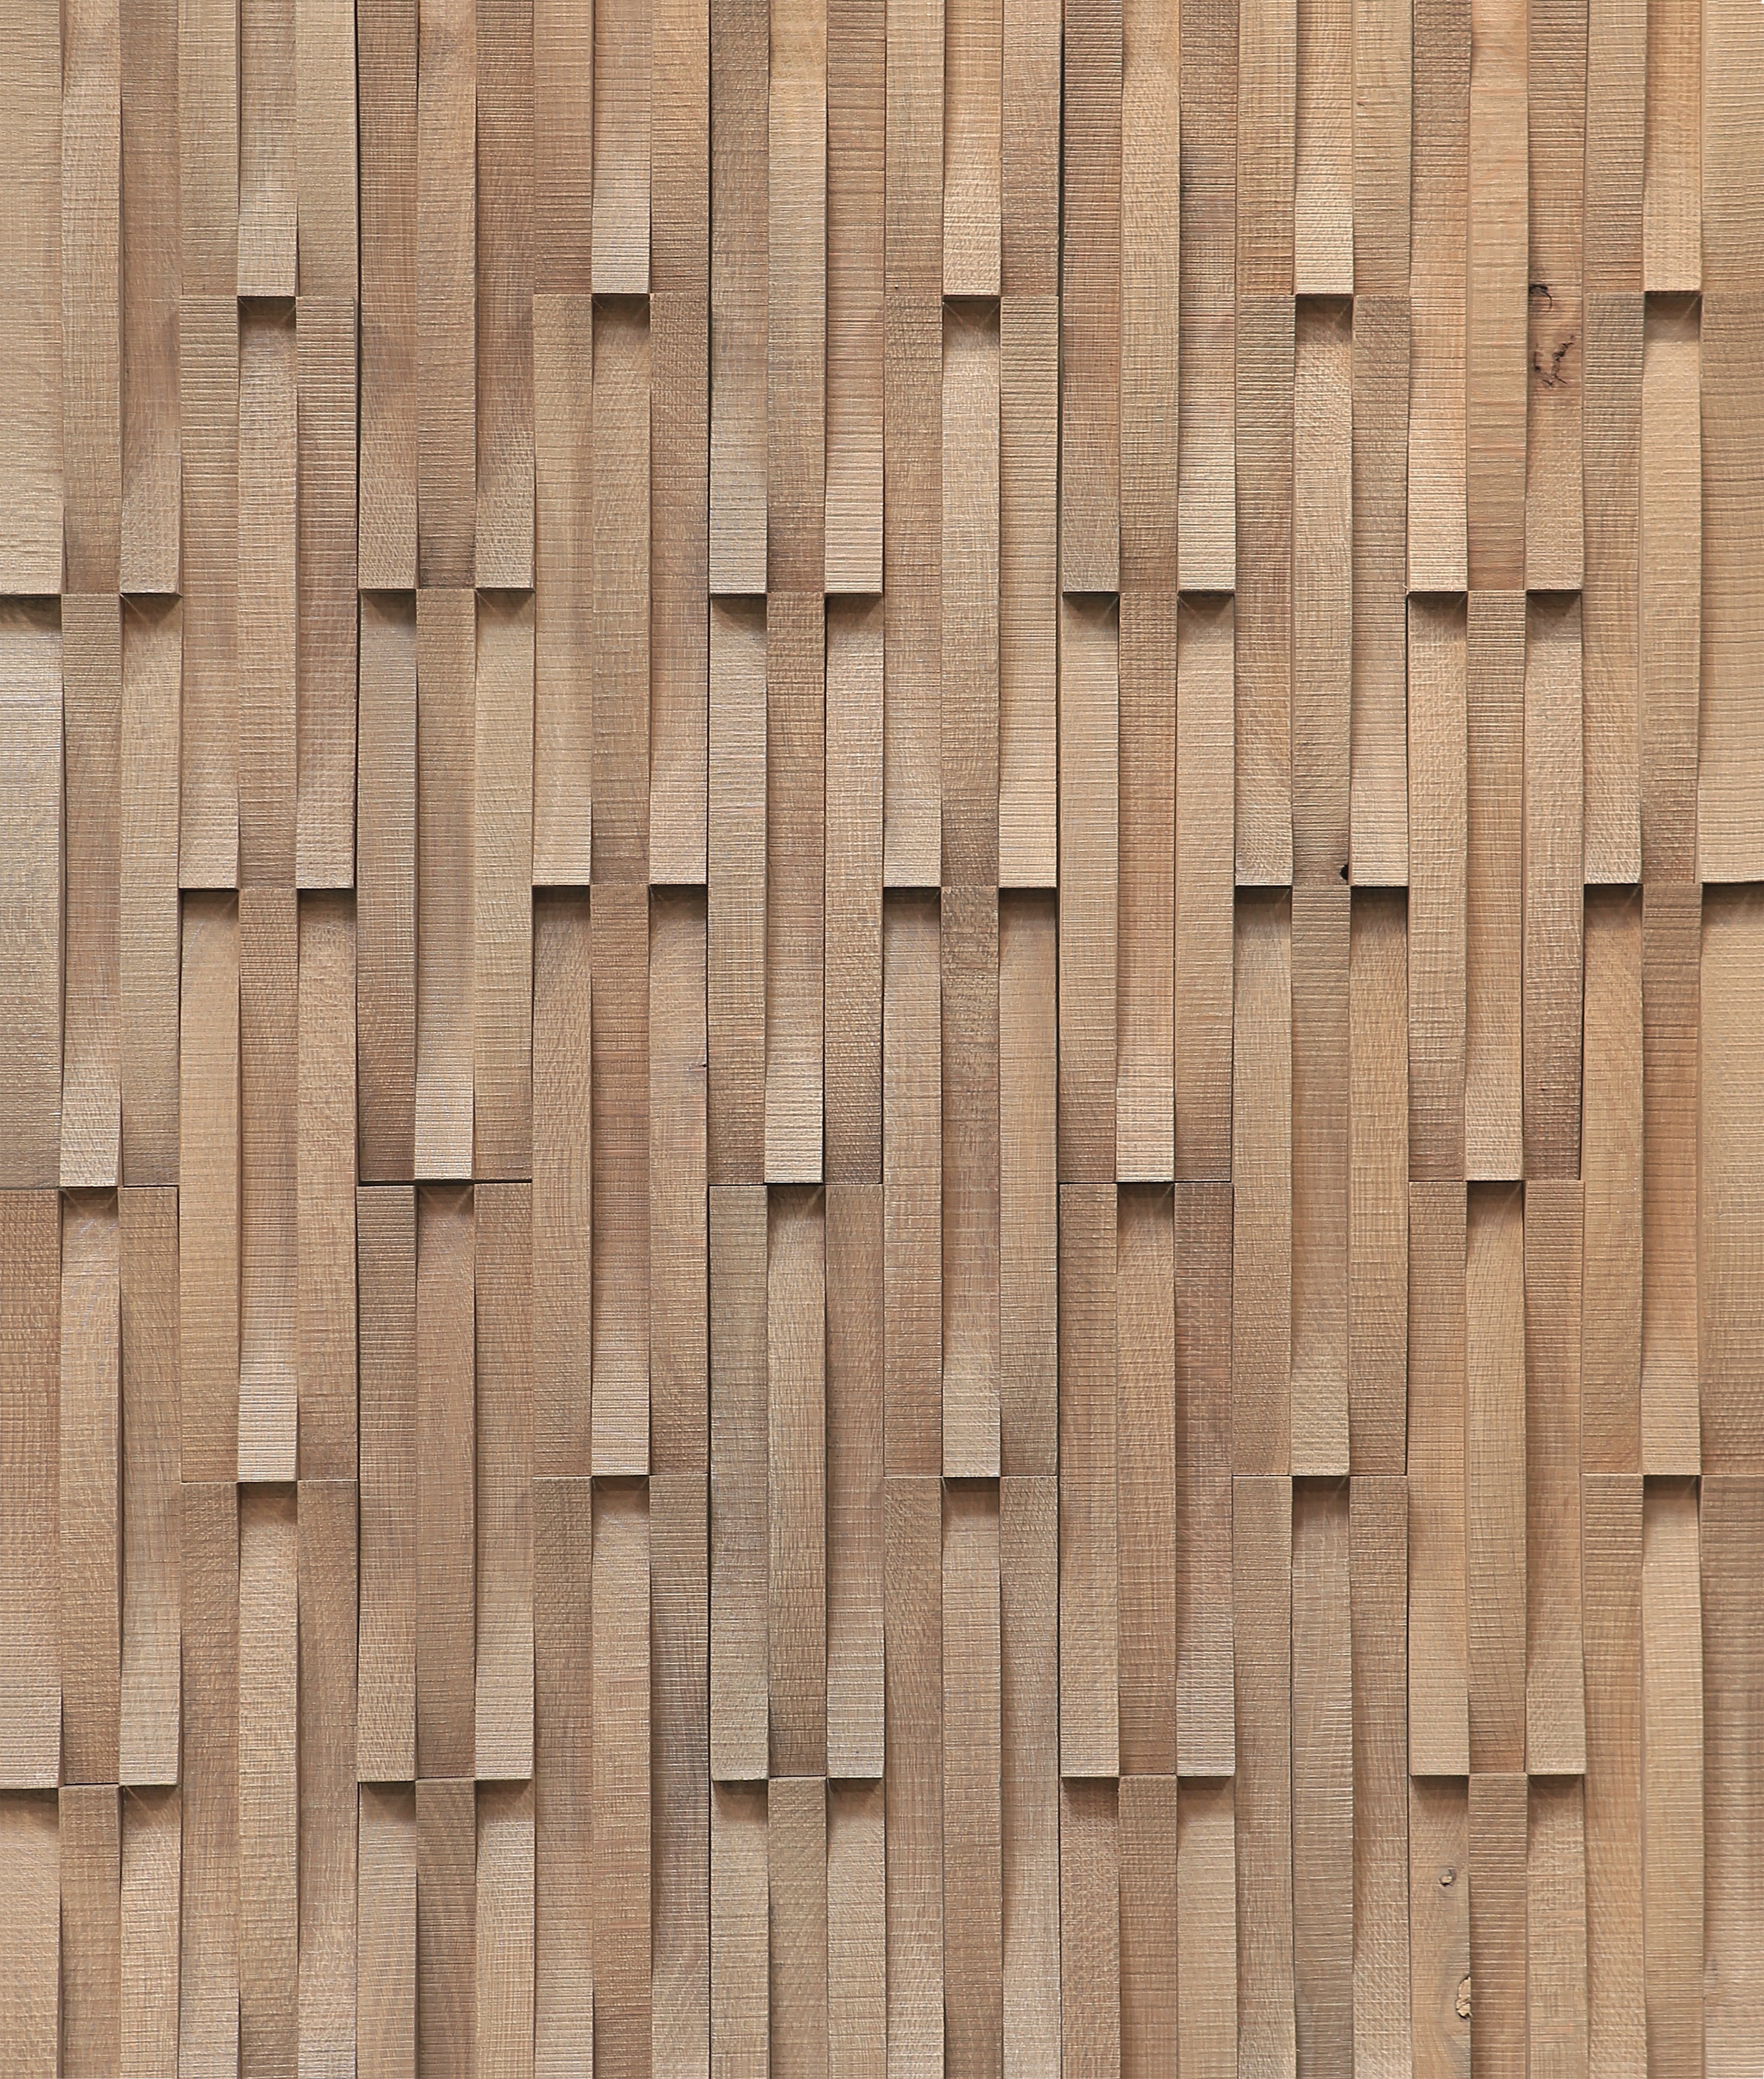 duchateau inceptiv krescent lugano oak three dimensional wall natural wood panel matte lacquer for interior use distributed by surface group international